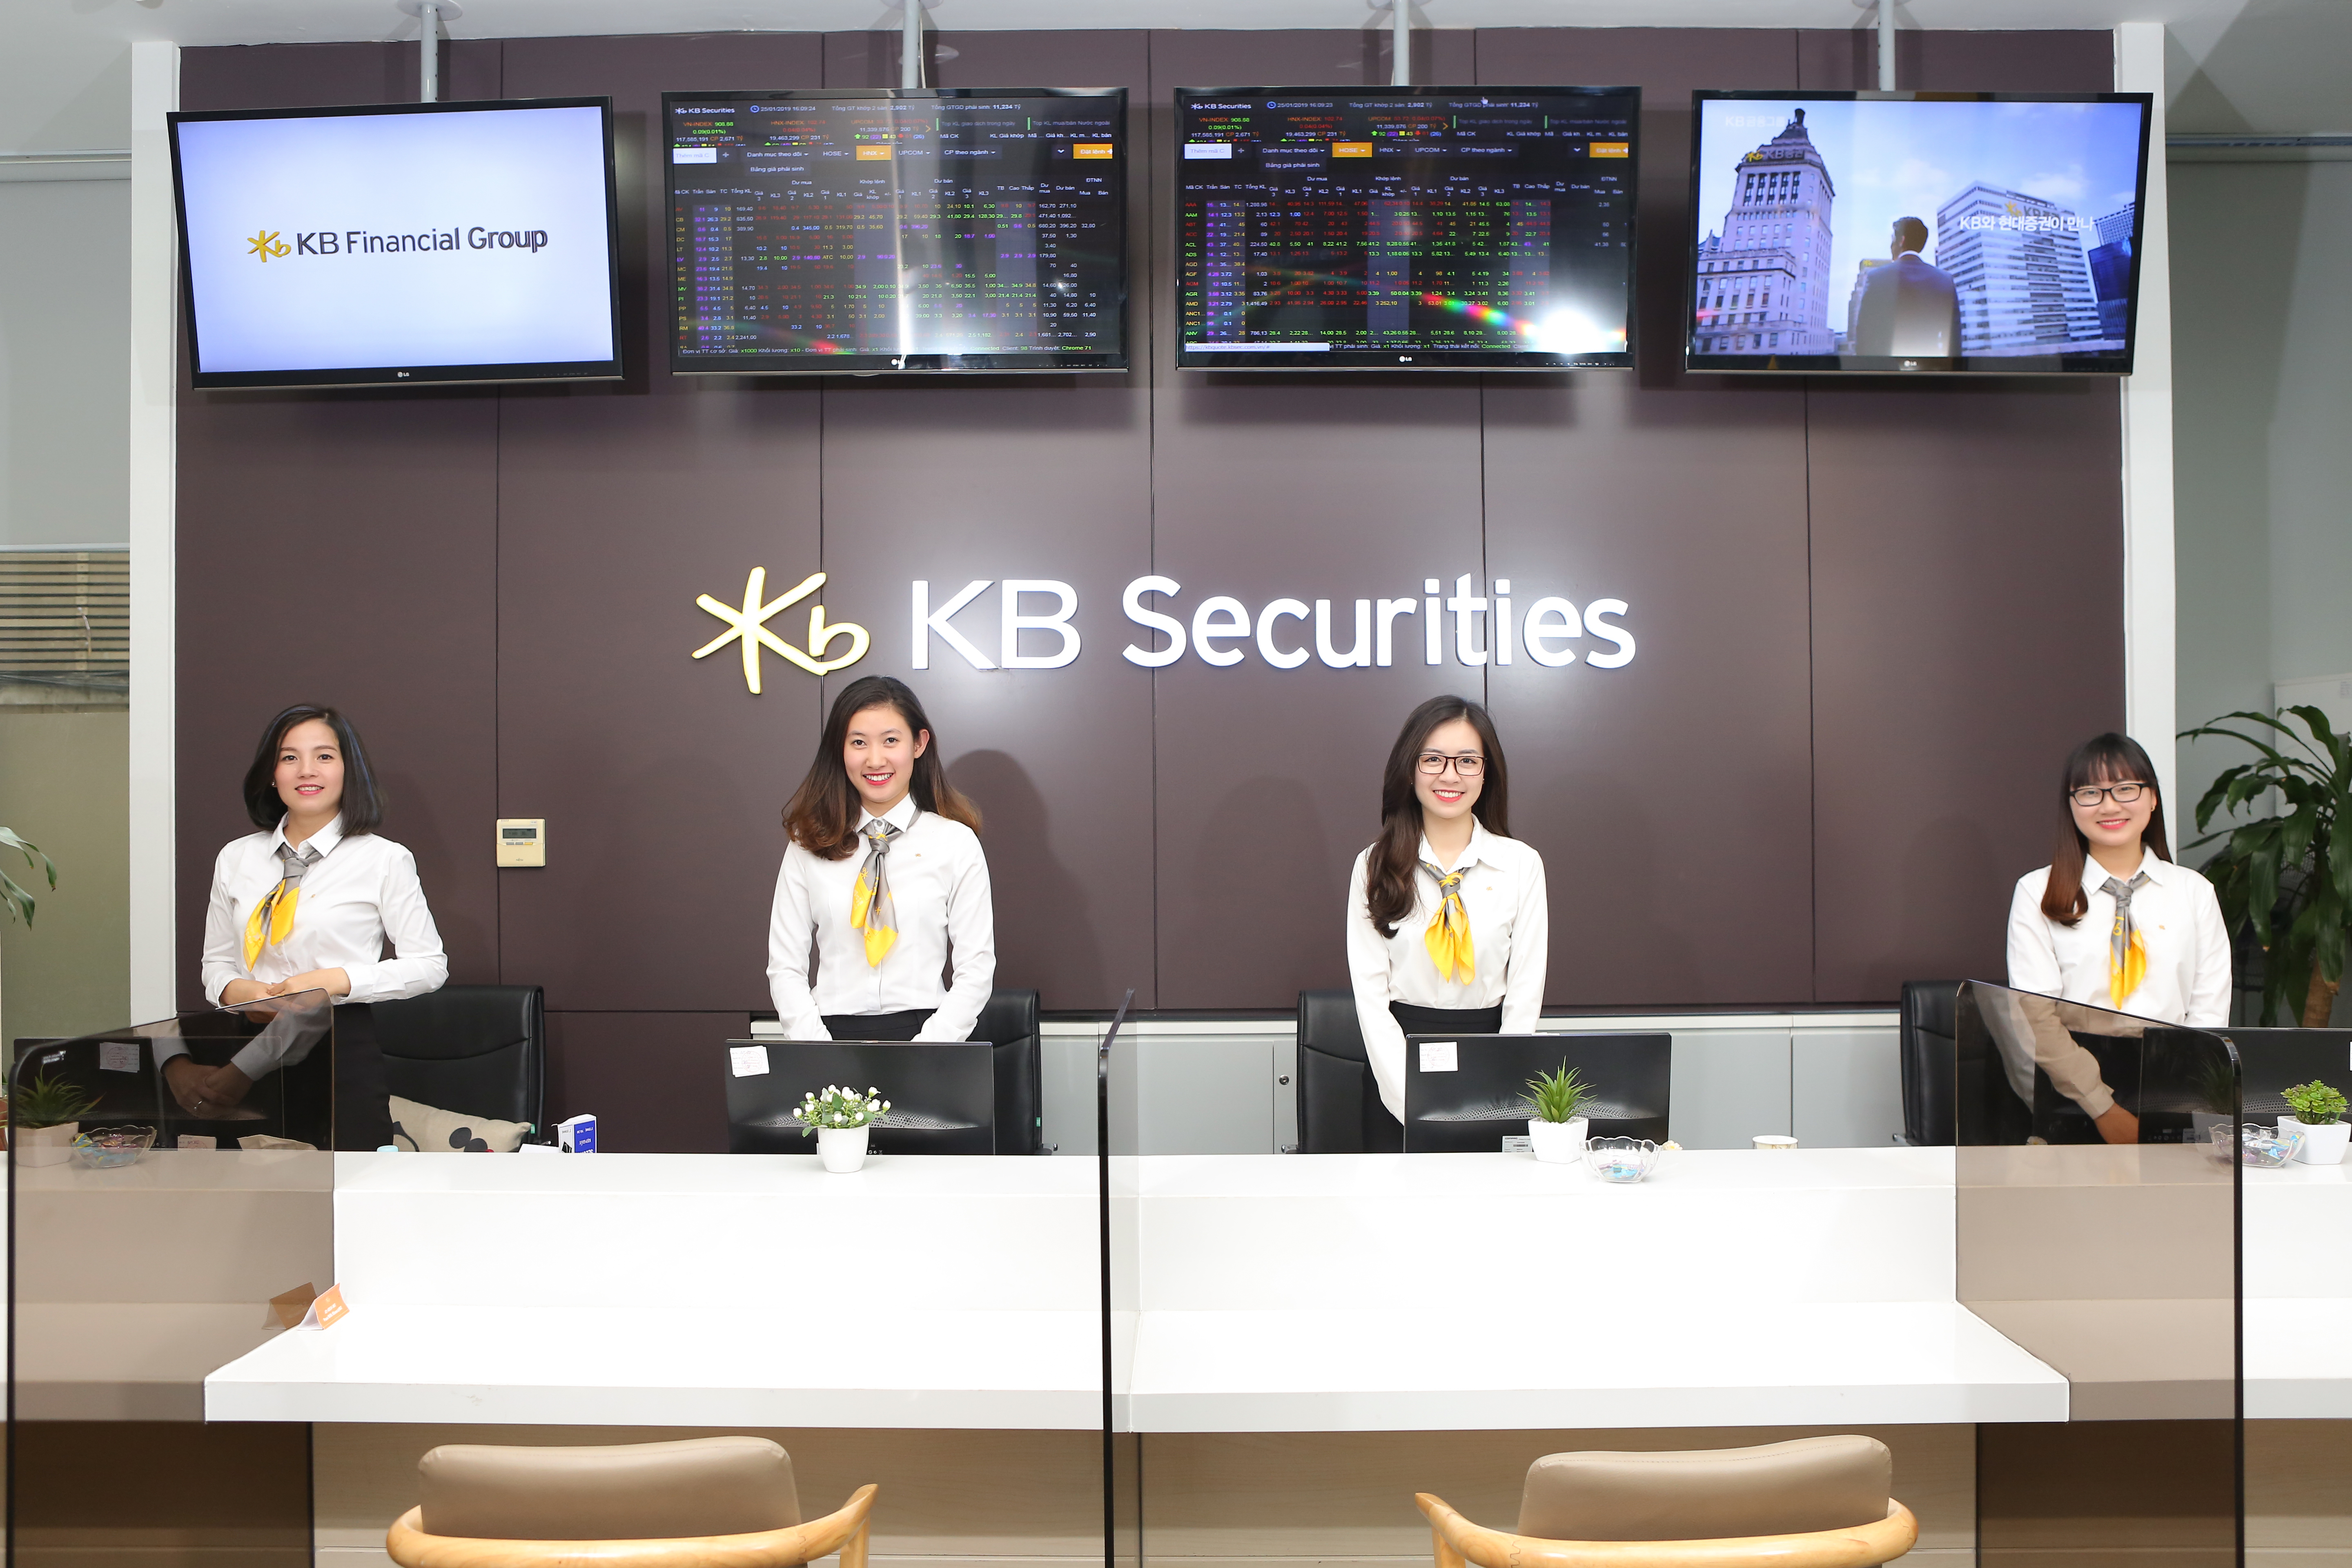 KBSV is strengthened by foreign capital - CafeF